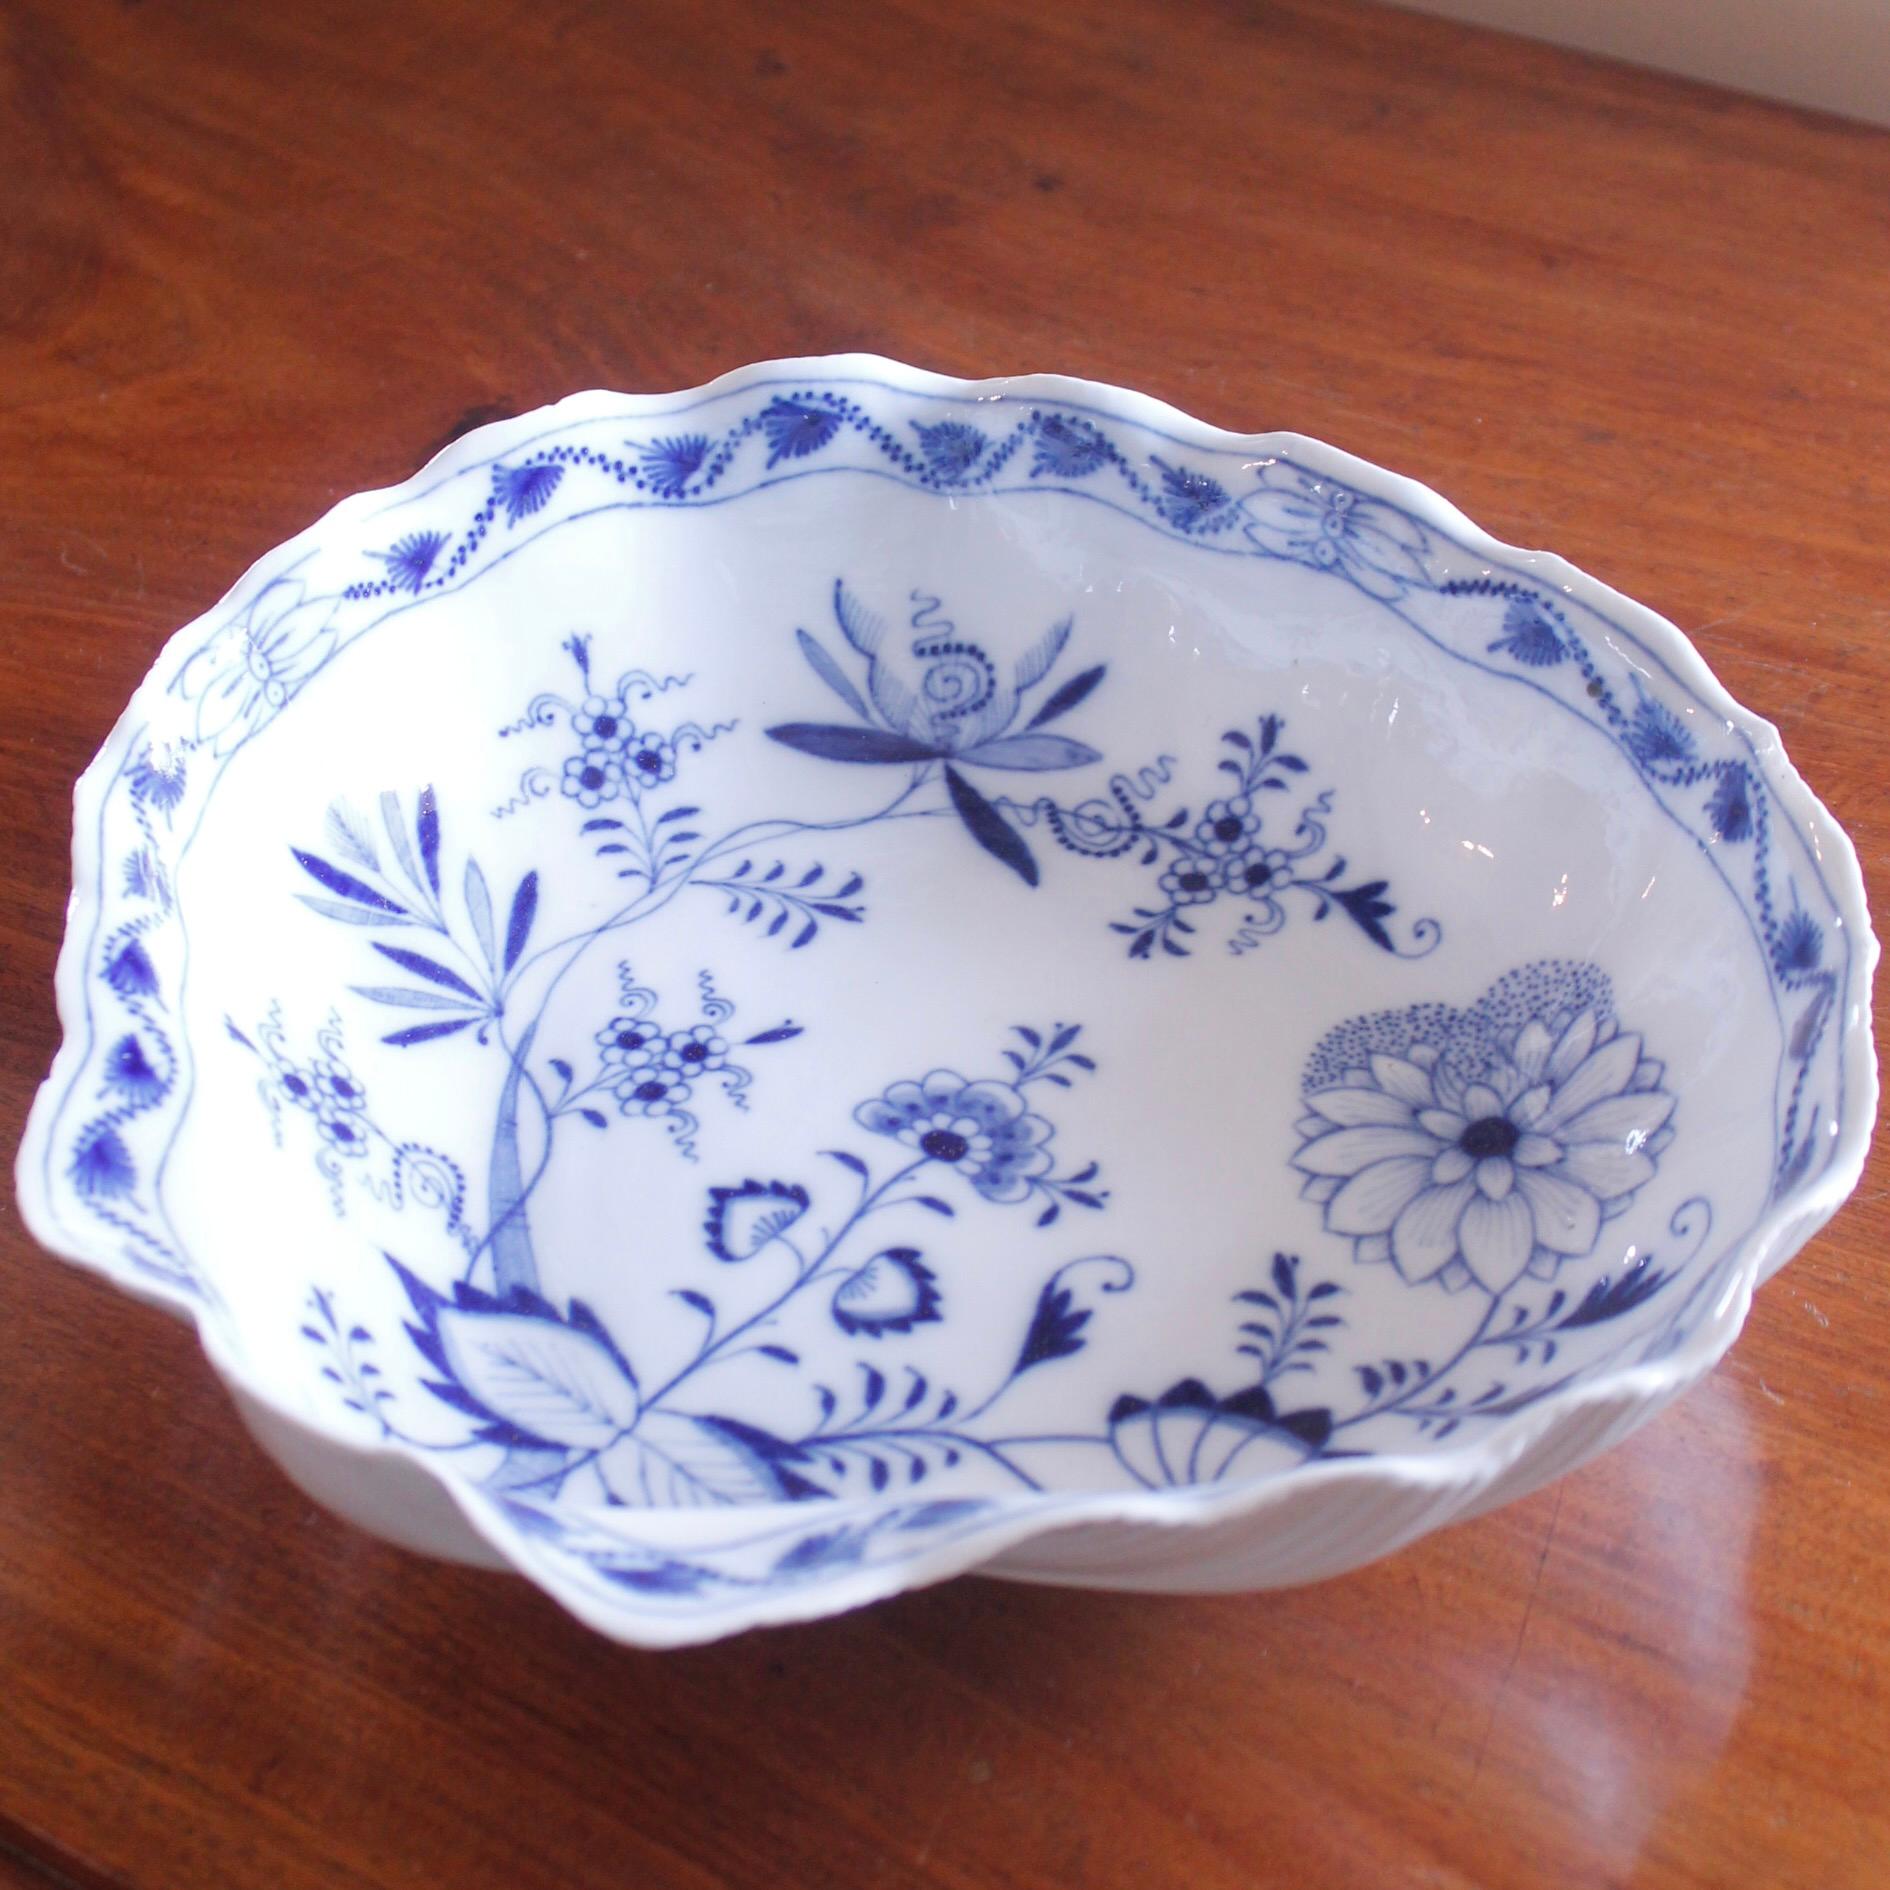 Rococo Large And Unusual Shell Shaped Antique Meissen Porcelain Bowl, 19th Century For Sale